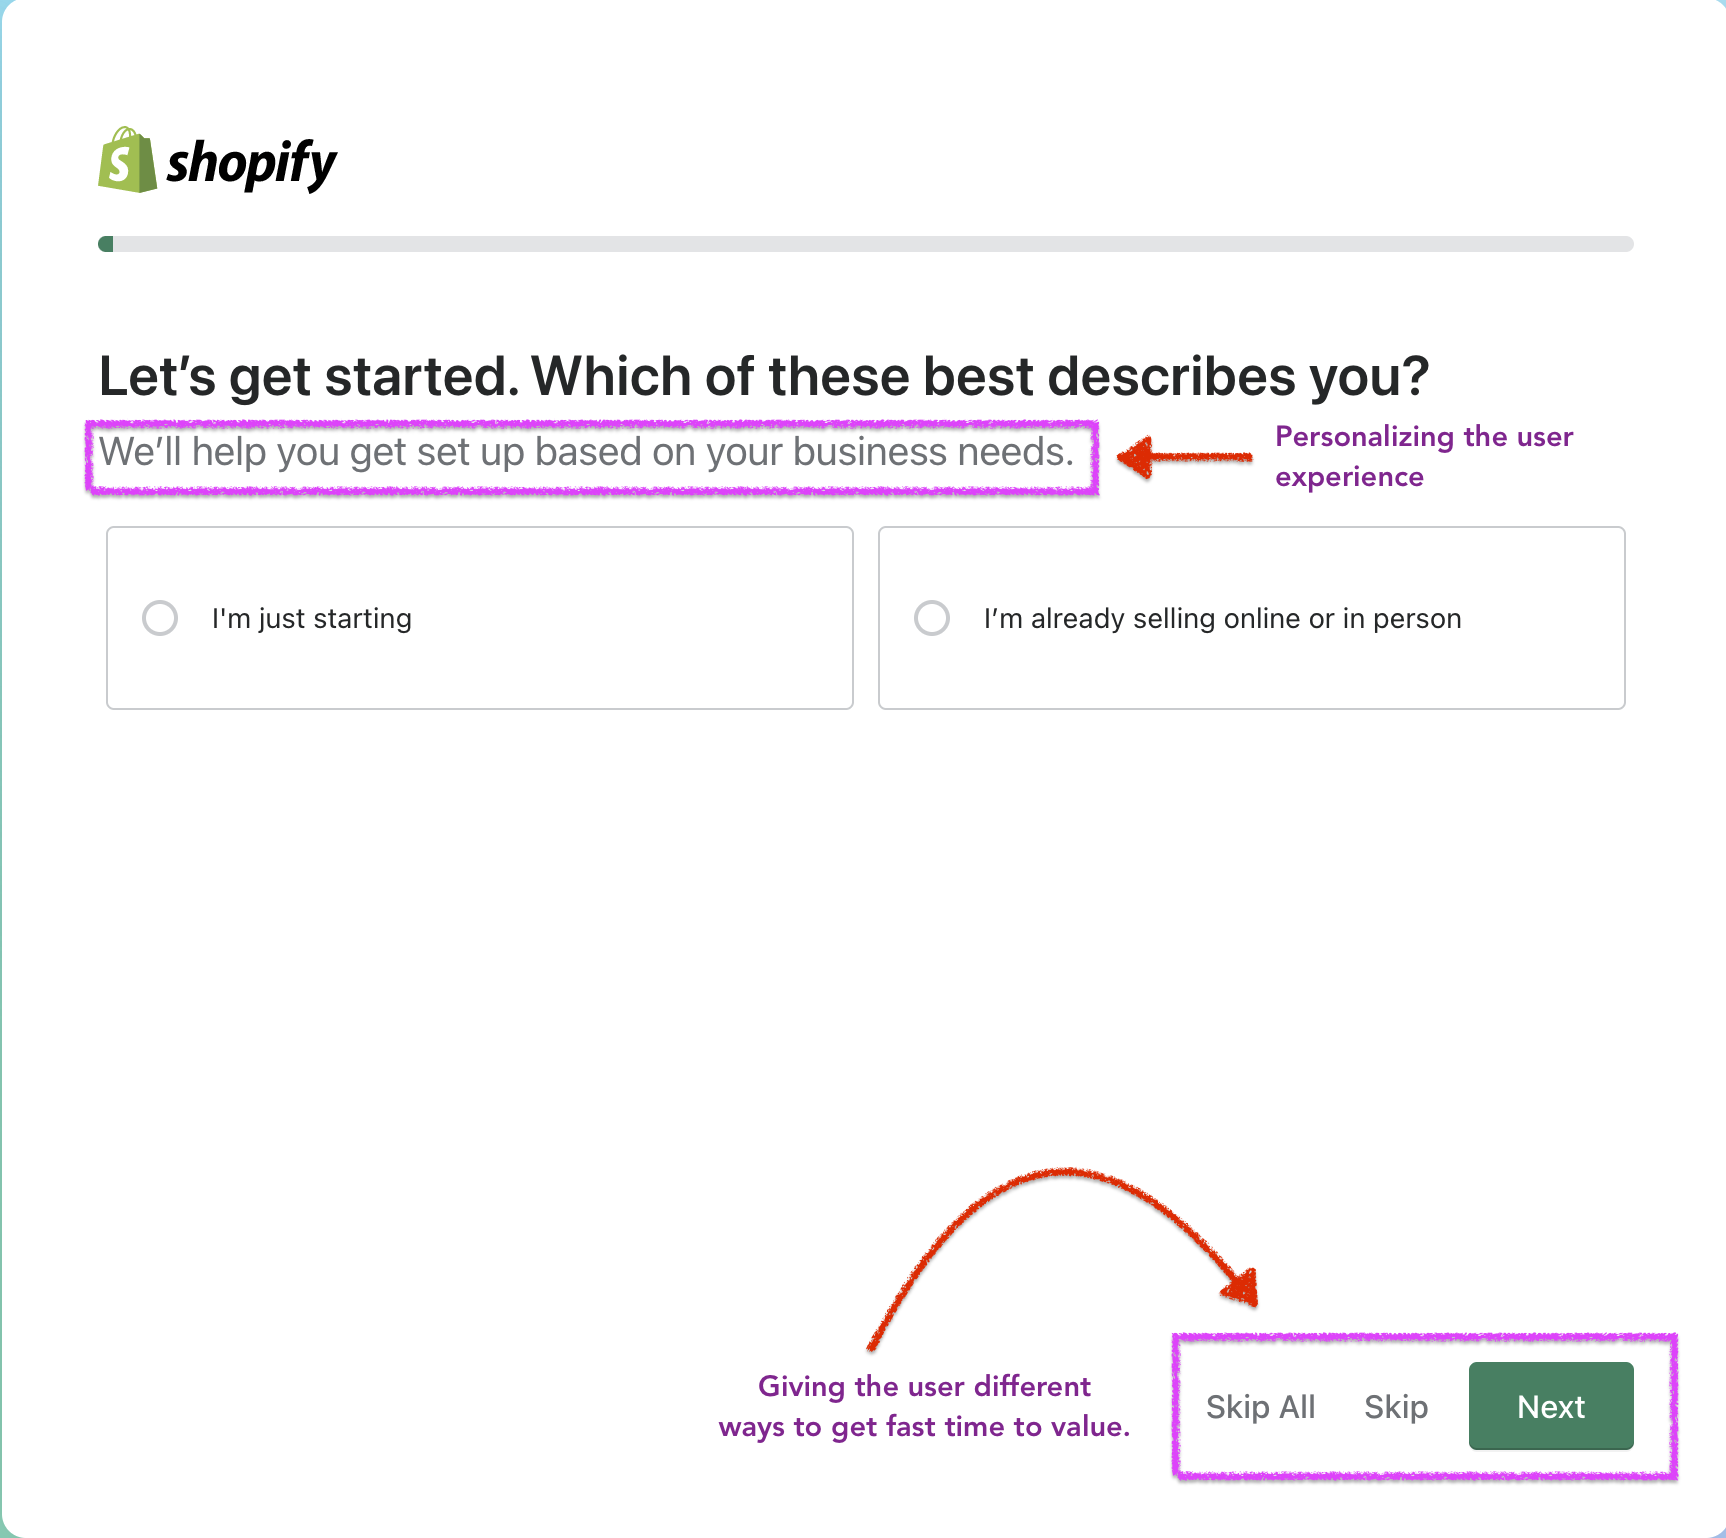 Shopify signup page